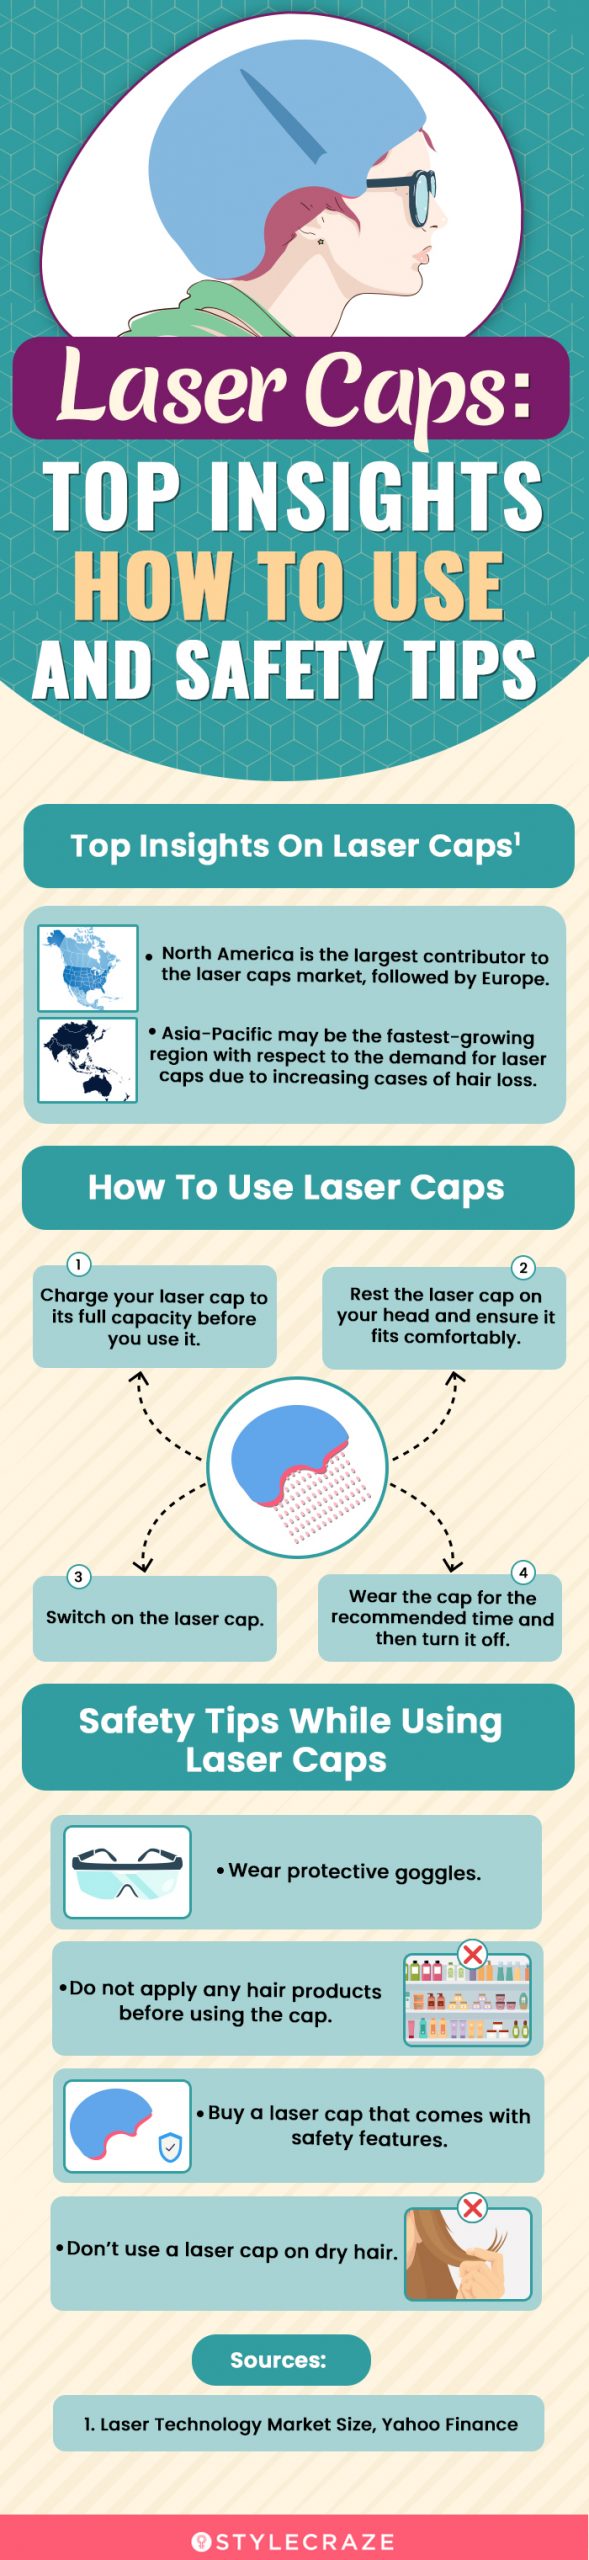 Laser Caps: Top Insights, How To Use, And Safety Tips (infographic)